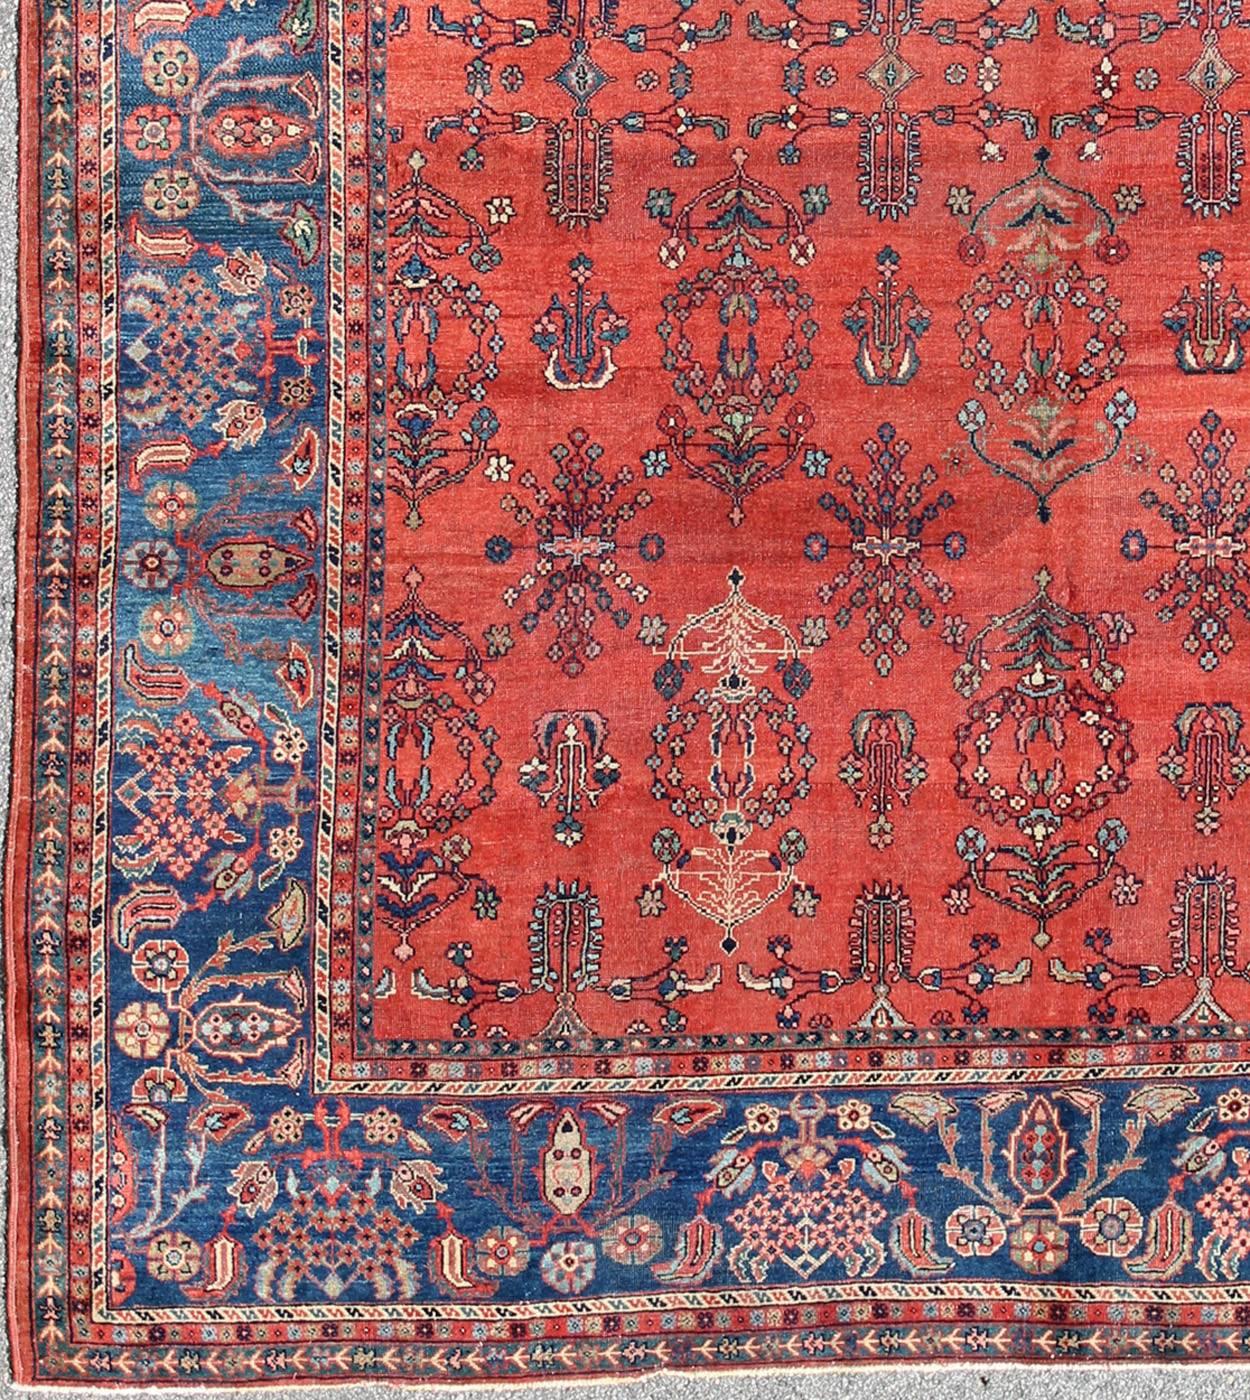 Square-Sized Antique Persian Sultanabad Rug in Terracotta Red and Medium Blue. Keivan Woven Arts / Rug/ C-0919, country of origin / type: Iran / Sultanabad, circa 1900.  
Measures: 10'7 x 11'9.
This antique Persian Sultanabad from the turn of 20th